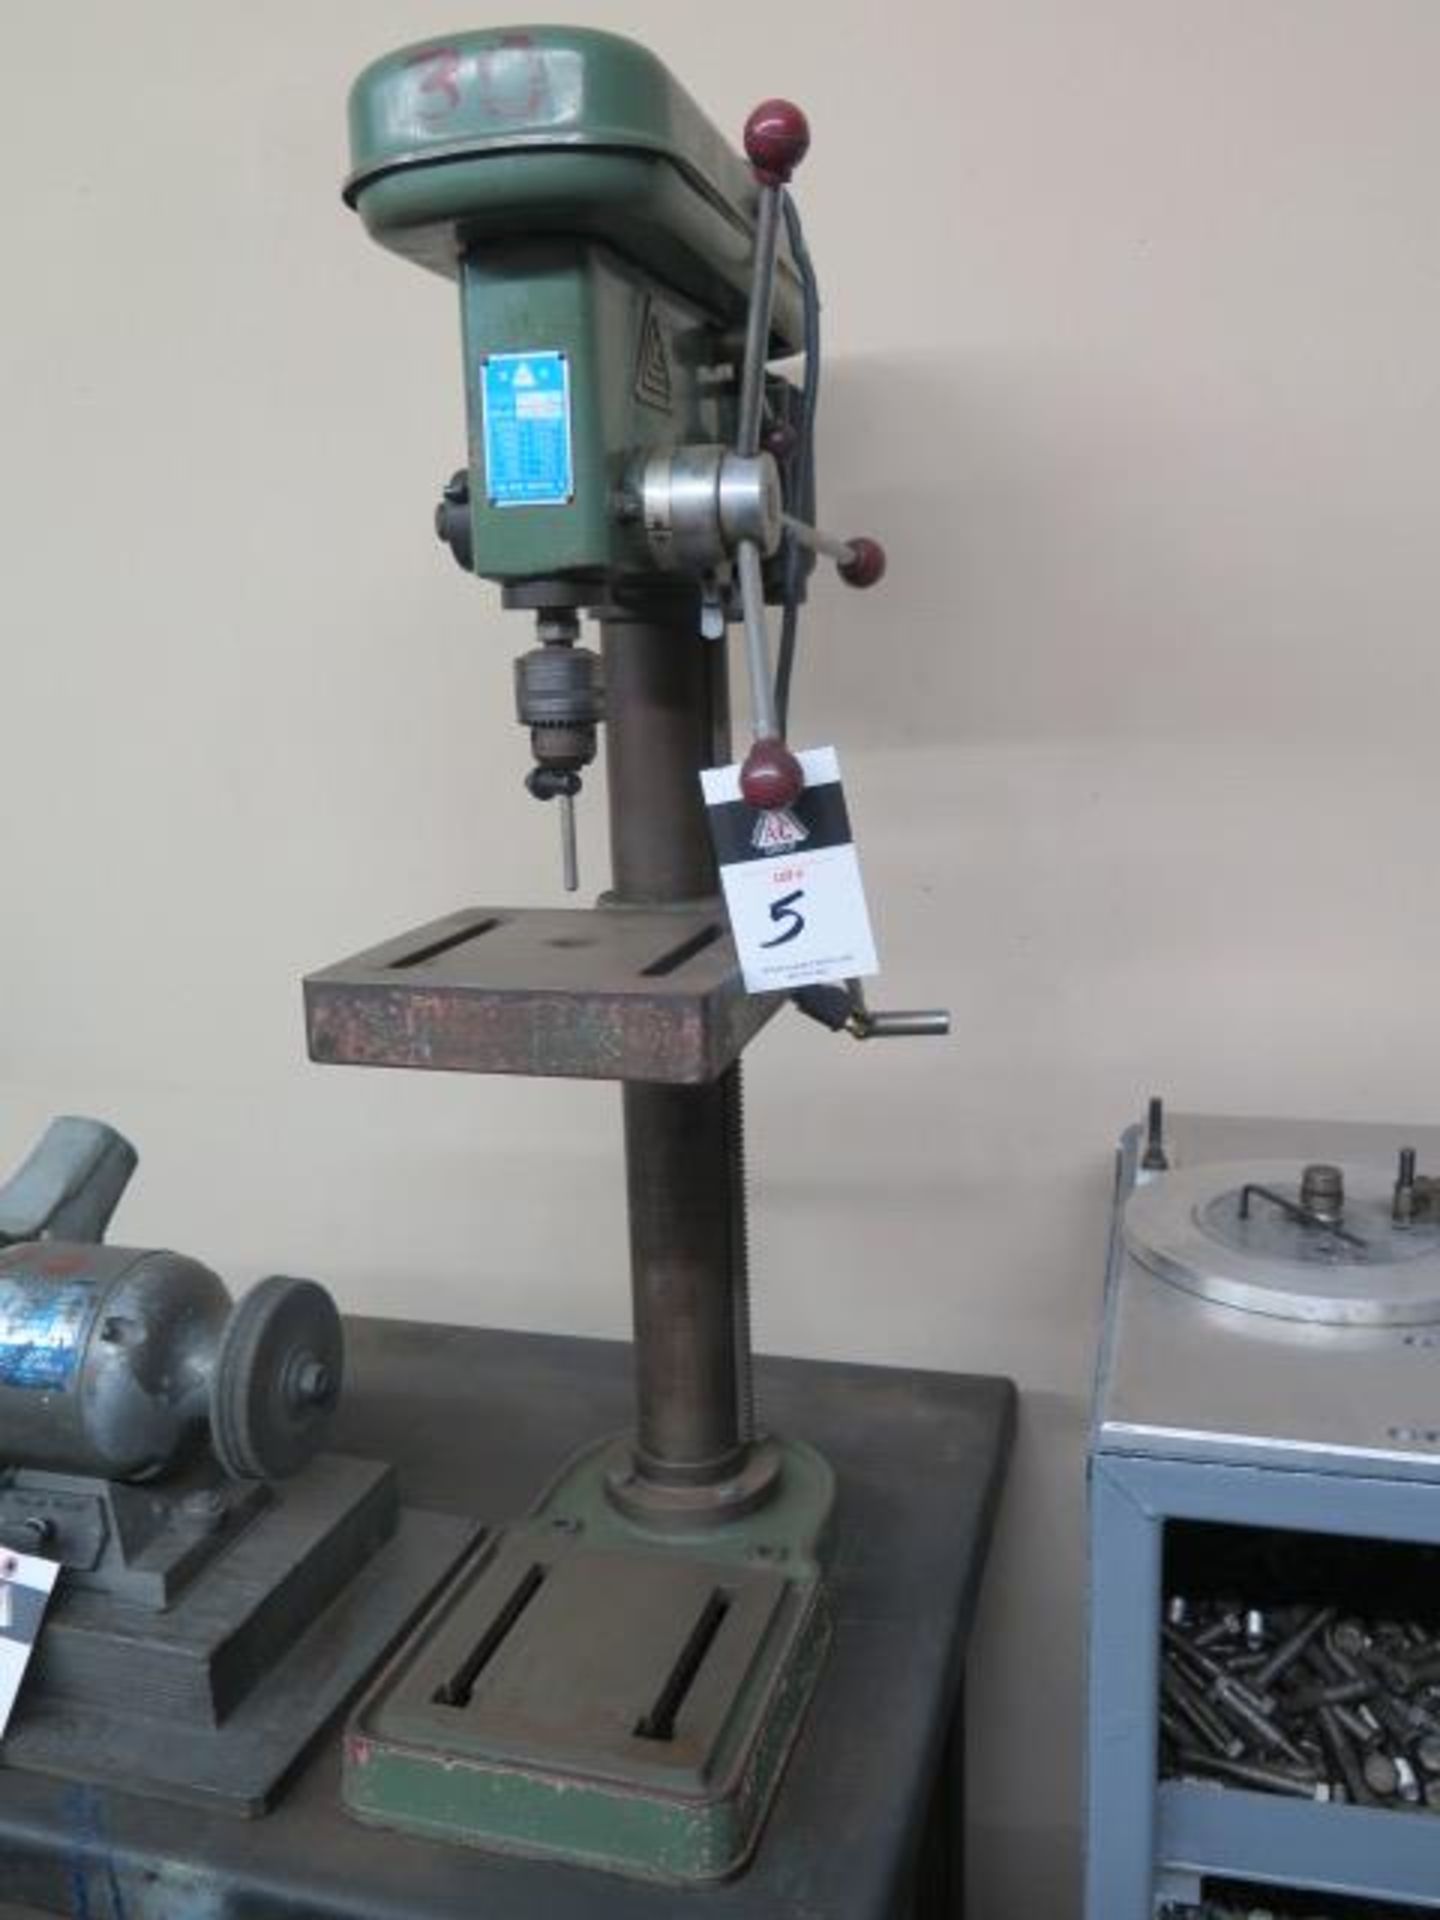 Liang Sheng Bench Model Drill Press (SOLD AS-IS - NO WARRANTY)